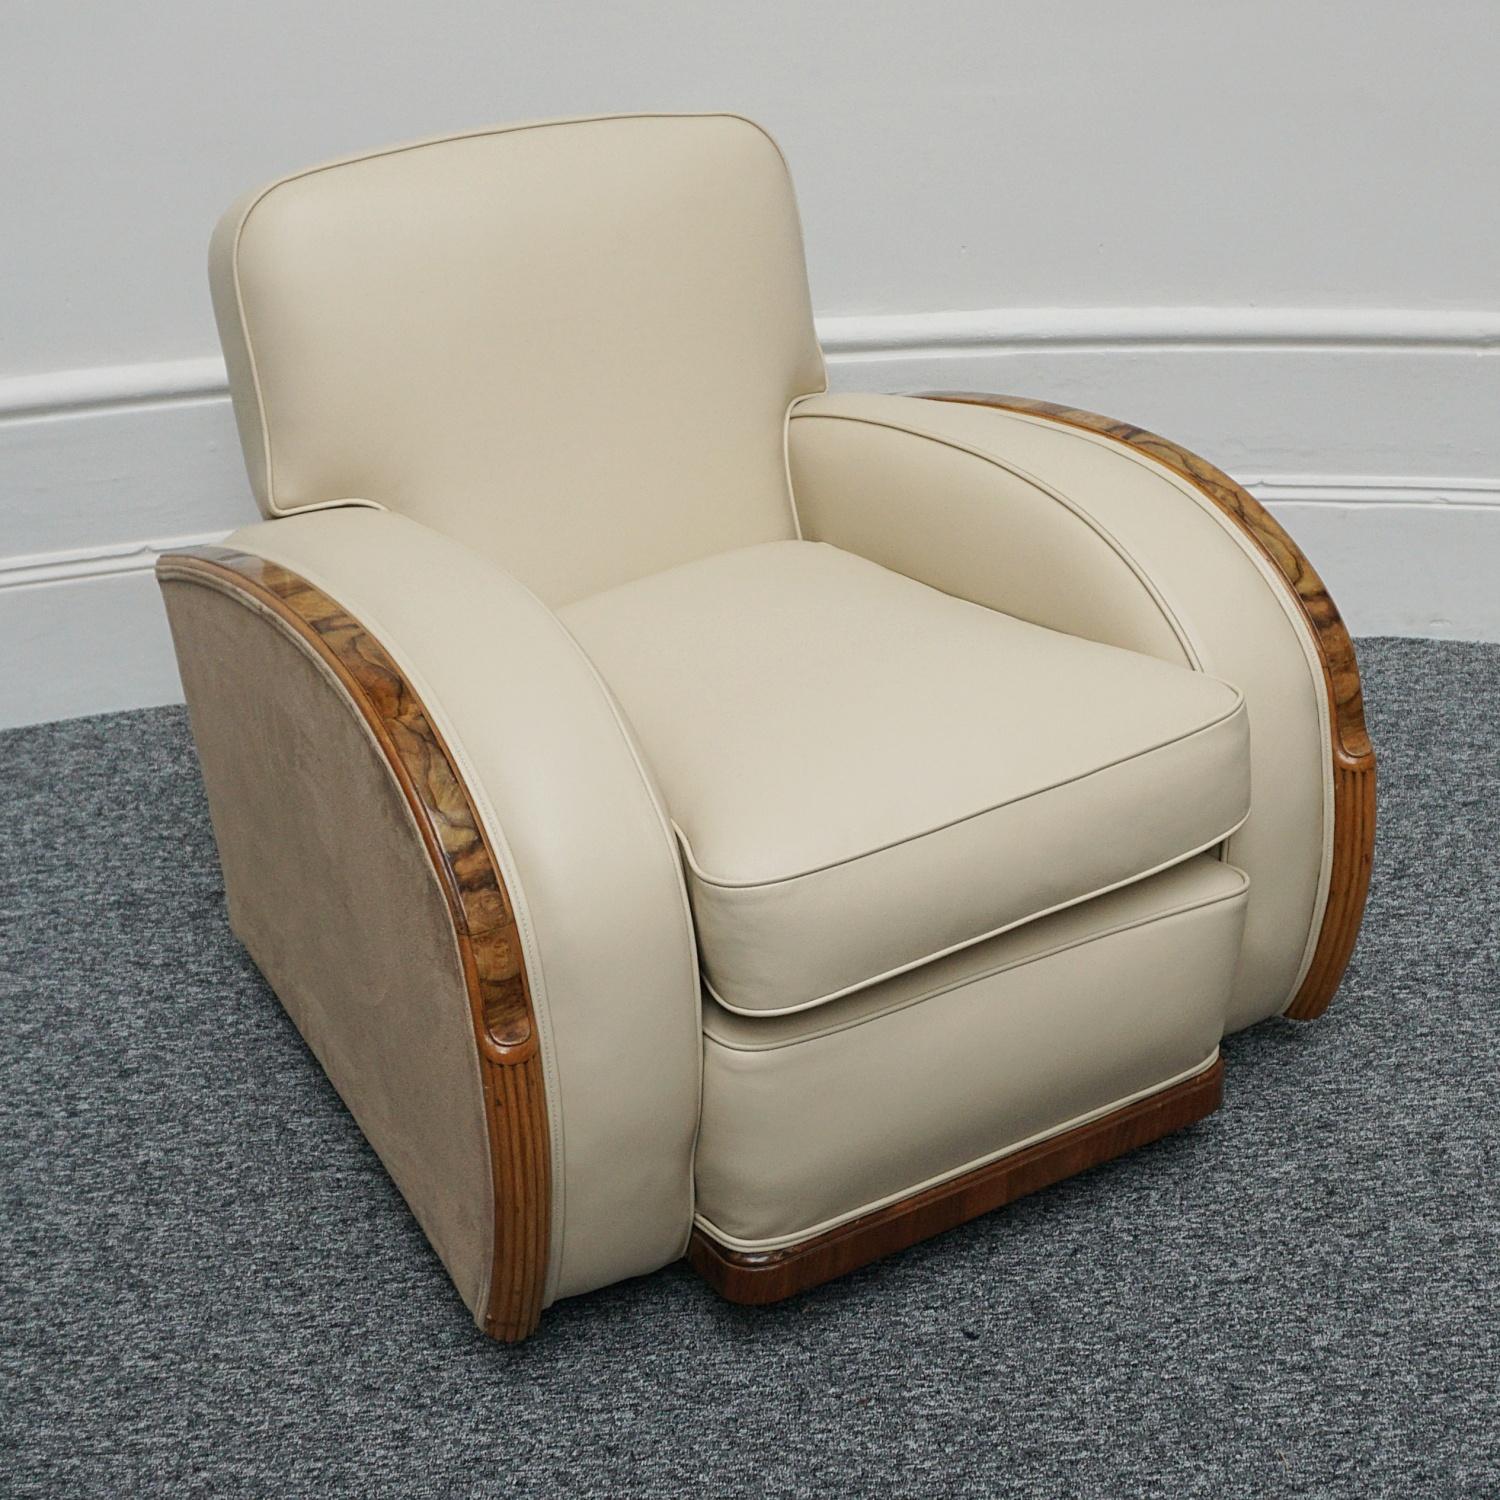 Mid-20th Century An Art Deco Three Piece Lounge Suite by Heal's of London Circa 1935 